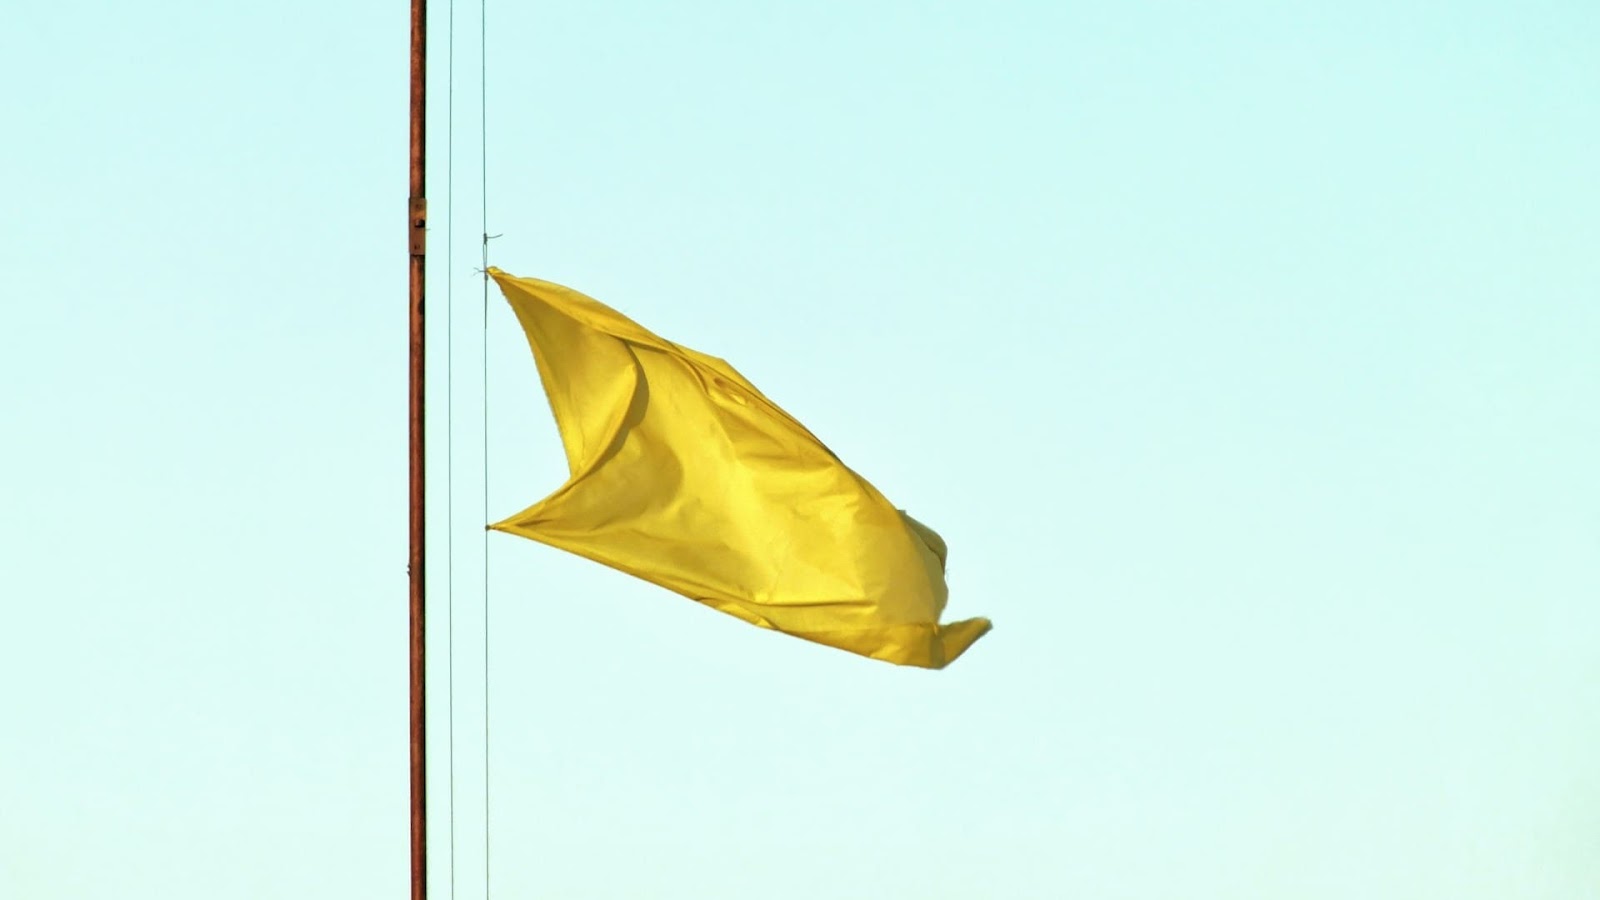 An image of a yellow safety flag at the beach